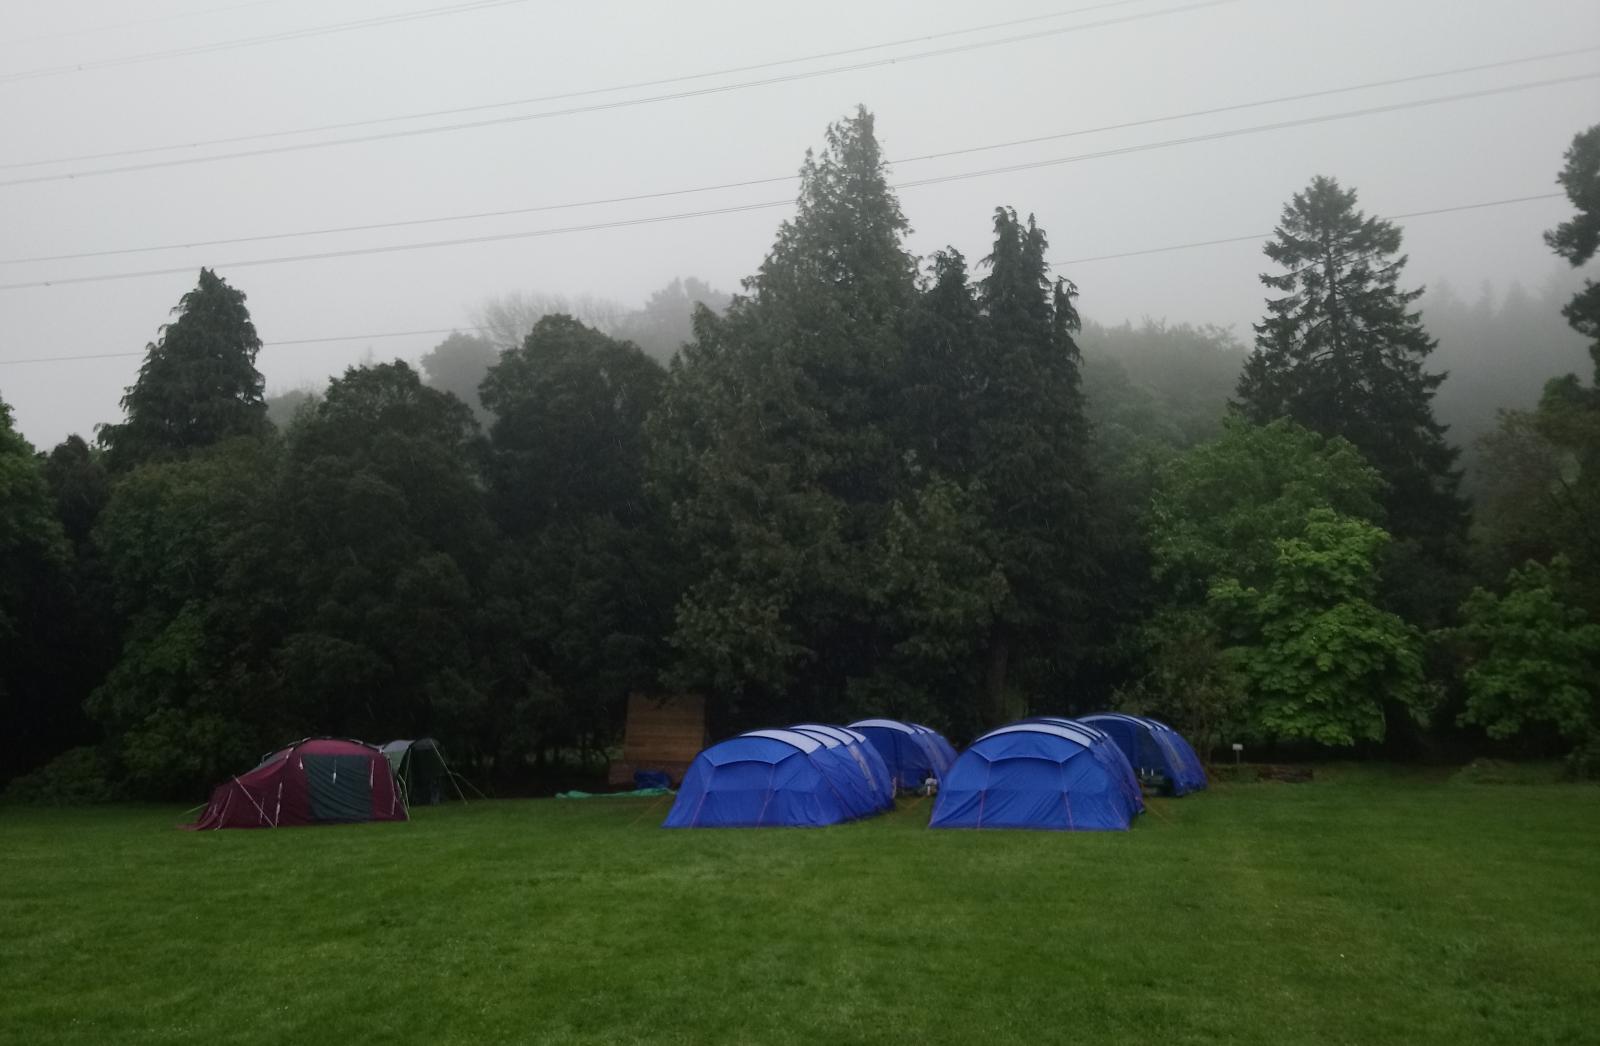 Wet camp, tents in the rain